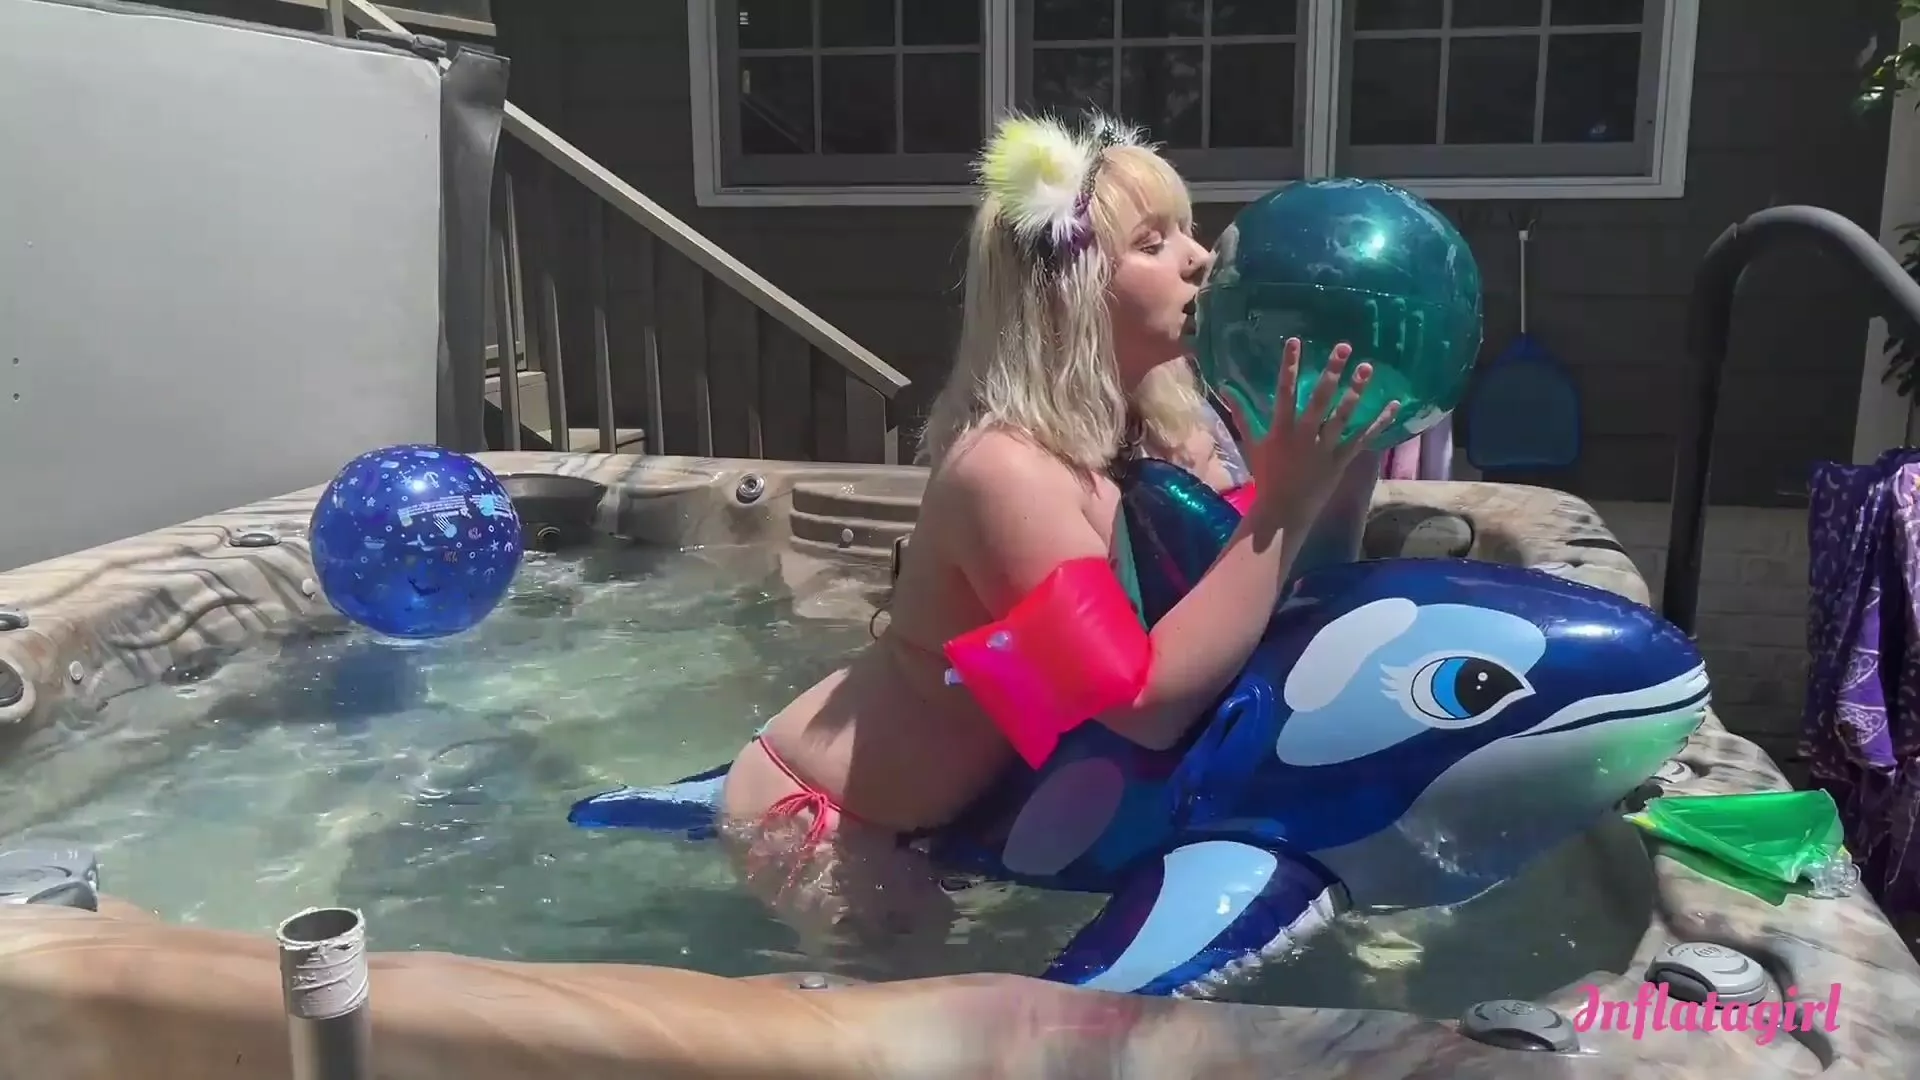 Inflatable Pool Porn - Inflatagirl fun with my pool toys in the hot tub xxx video